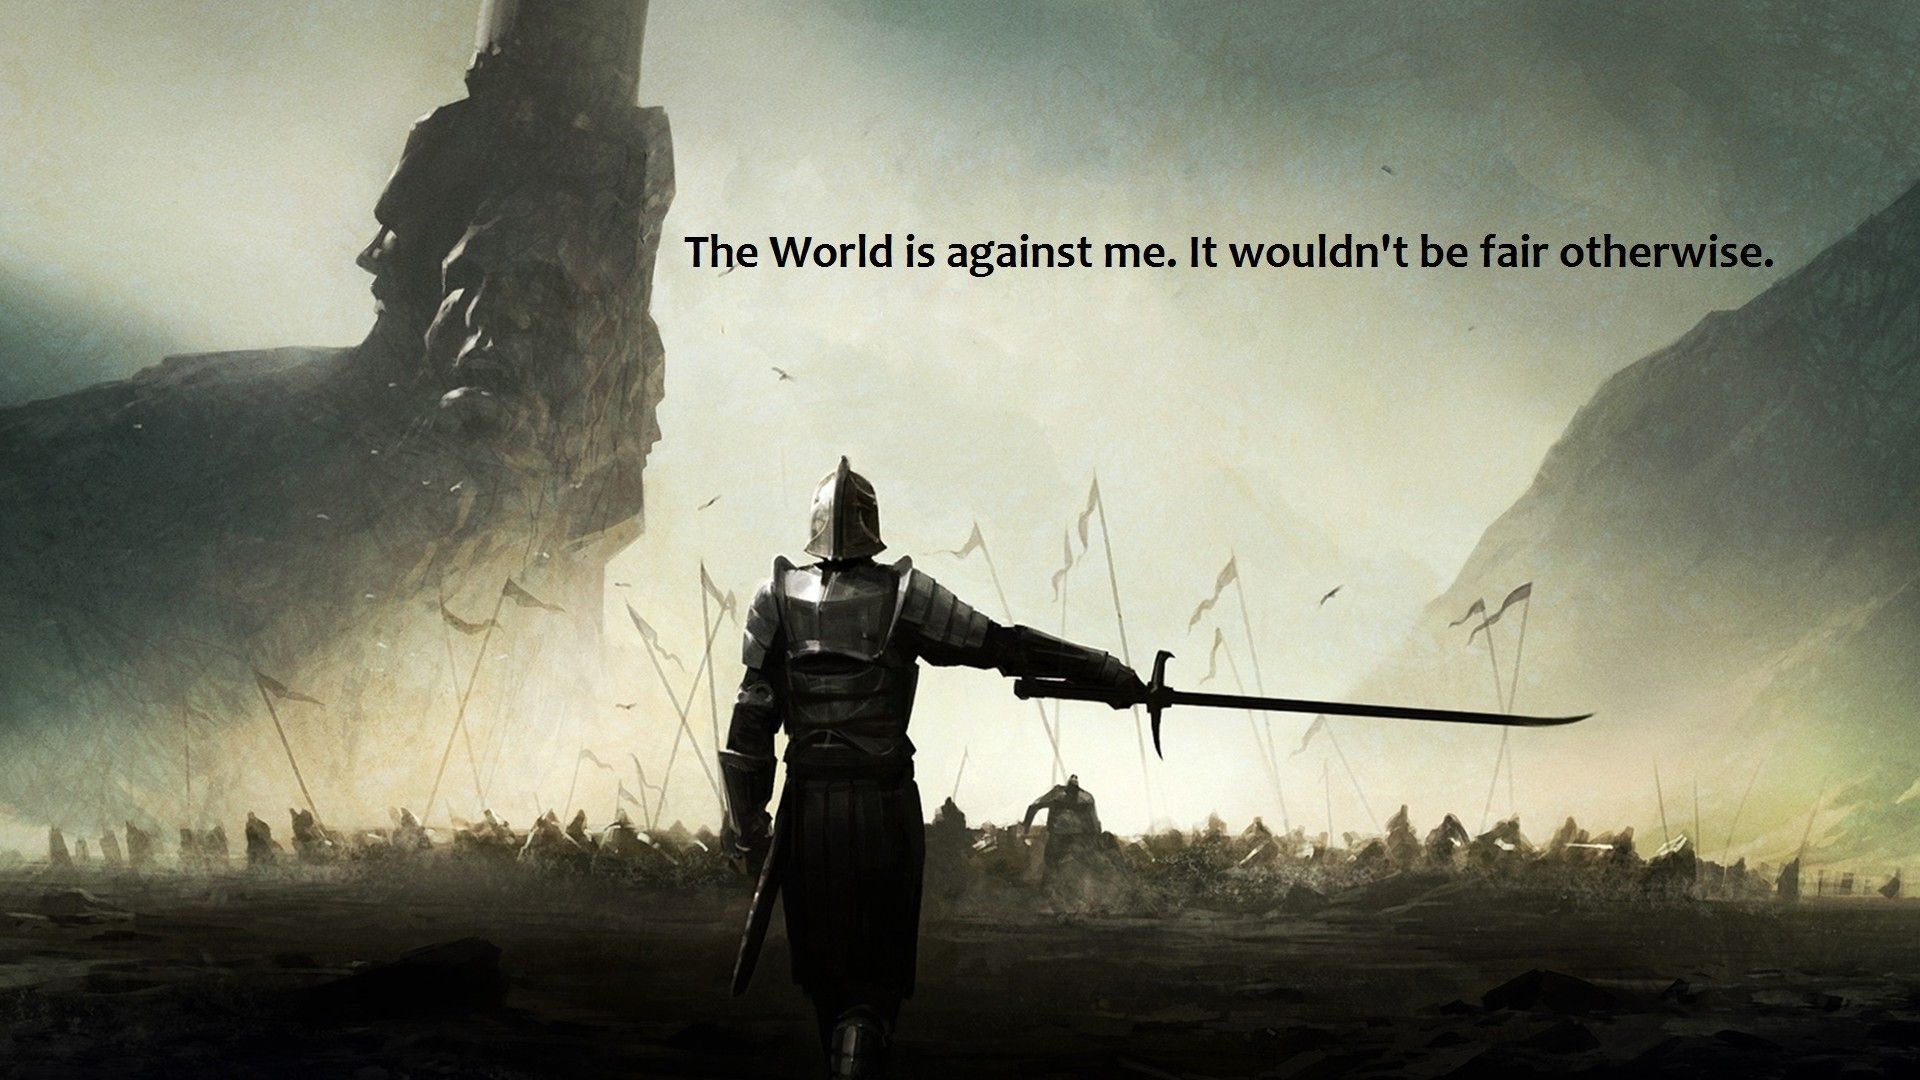 General 1920x1080 battle quote fantasy art video games warrior sword video game art knight text rear view motivational